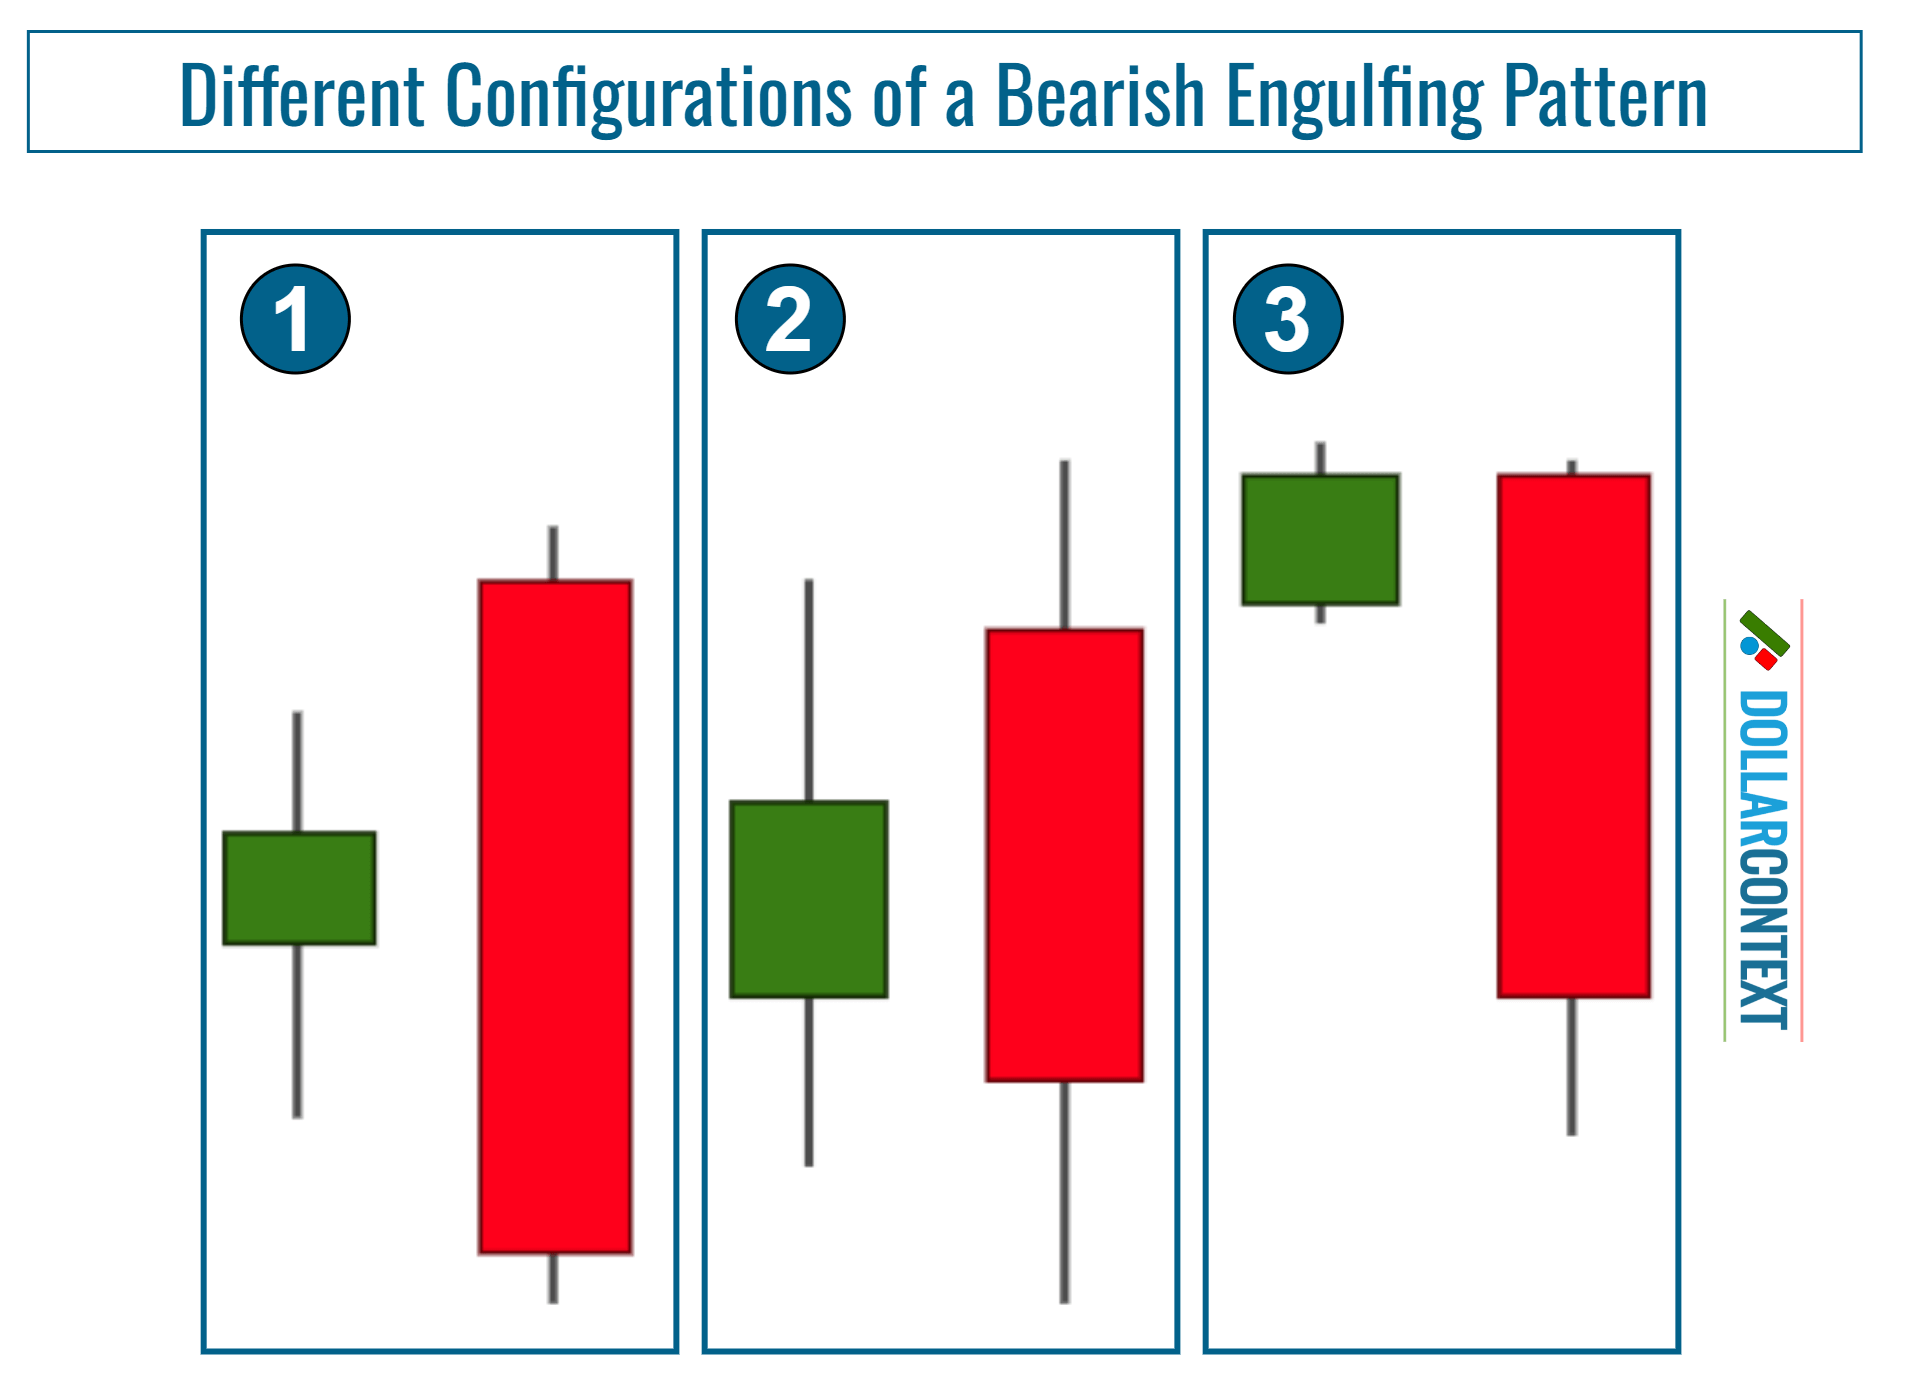 Different Degrees of Importance for a Bearish Engulfing Pattern